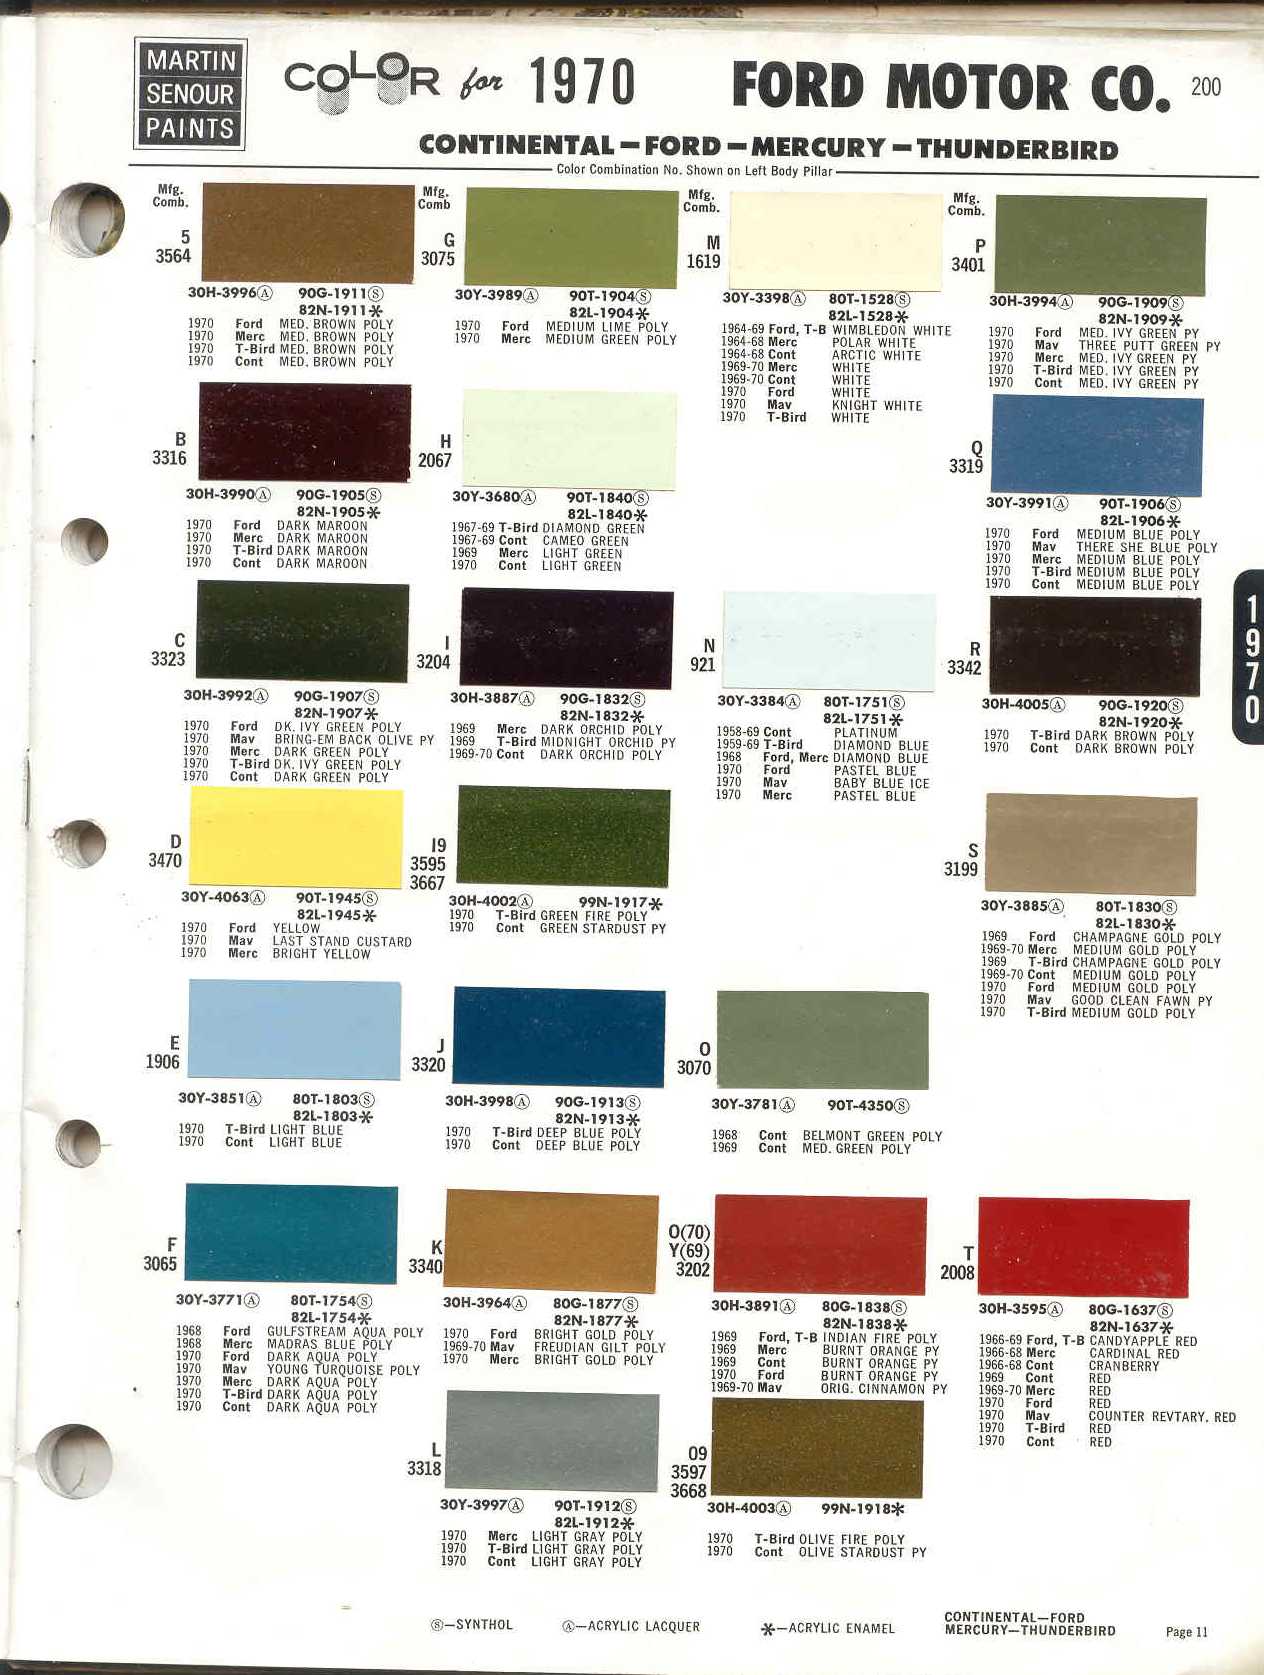 1973 Ford color codes #8